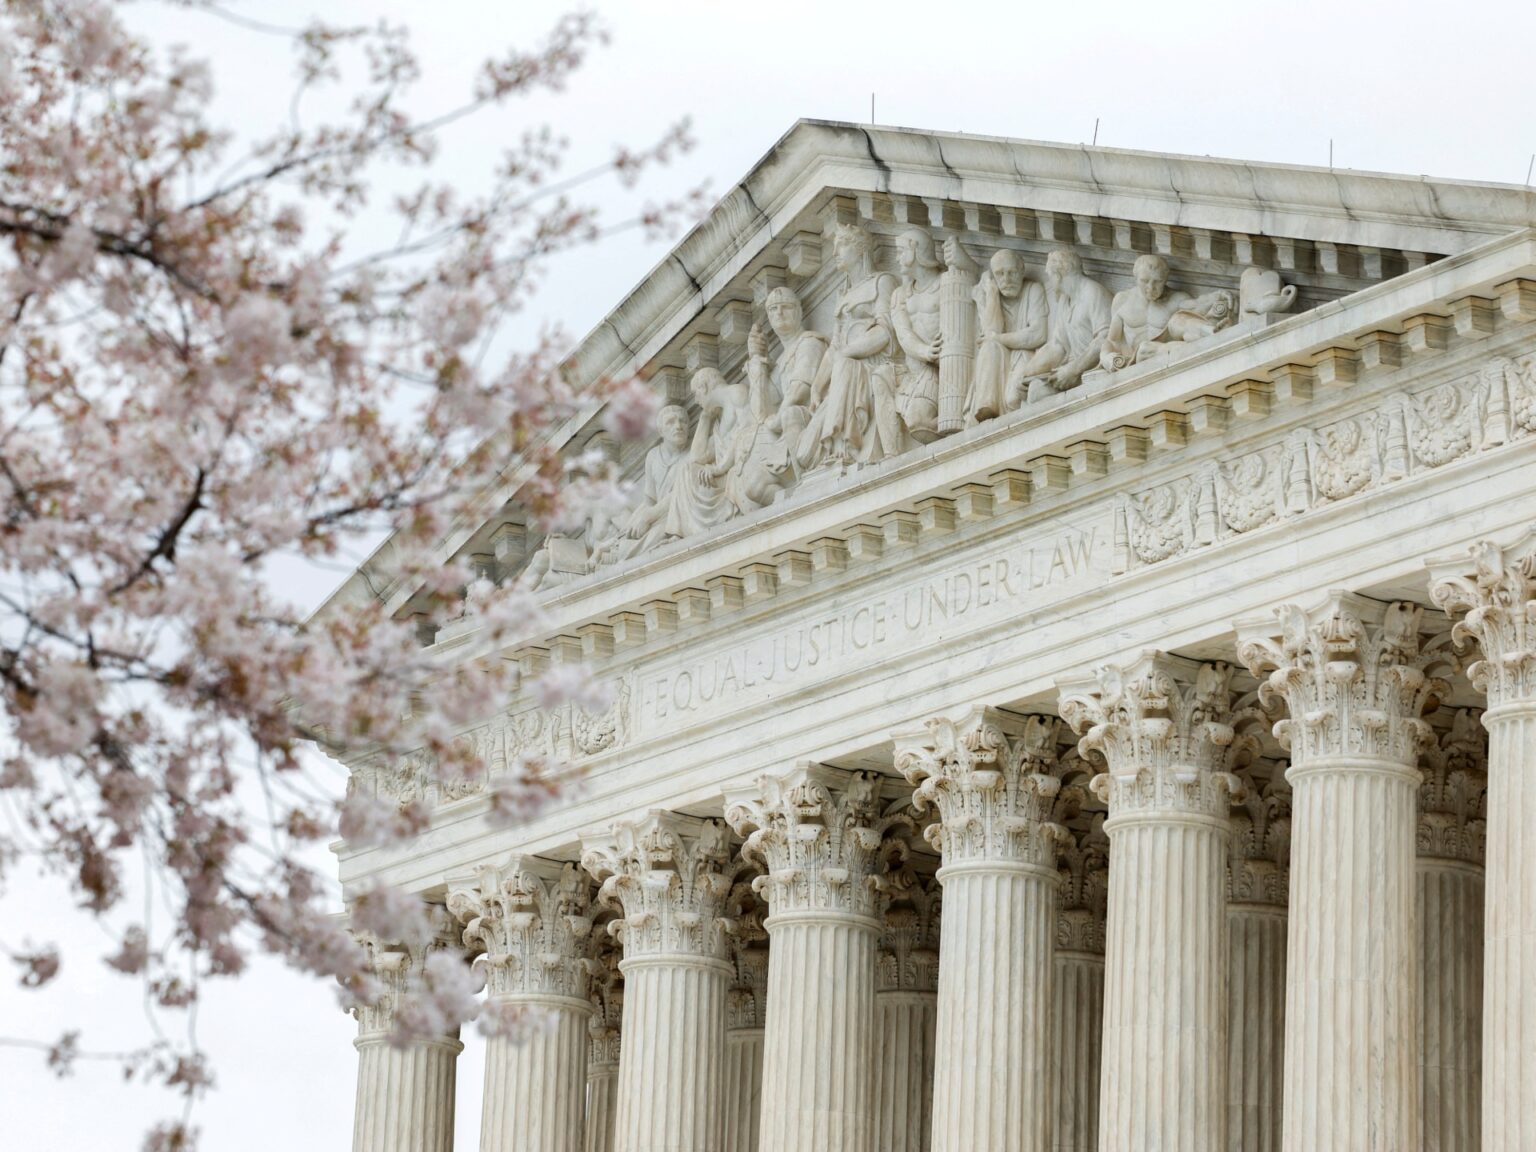 New deals from the US Supreme Court are a blow to organized labor